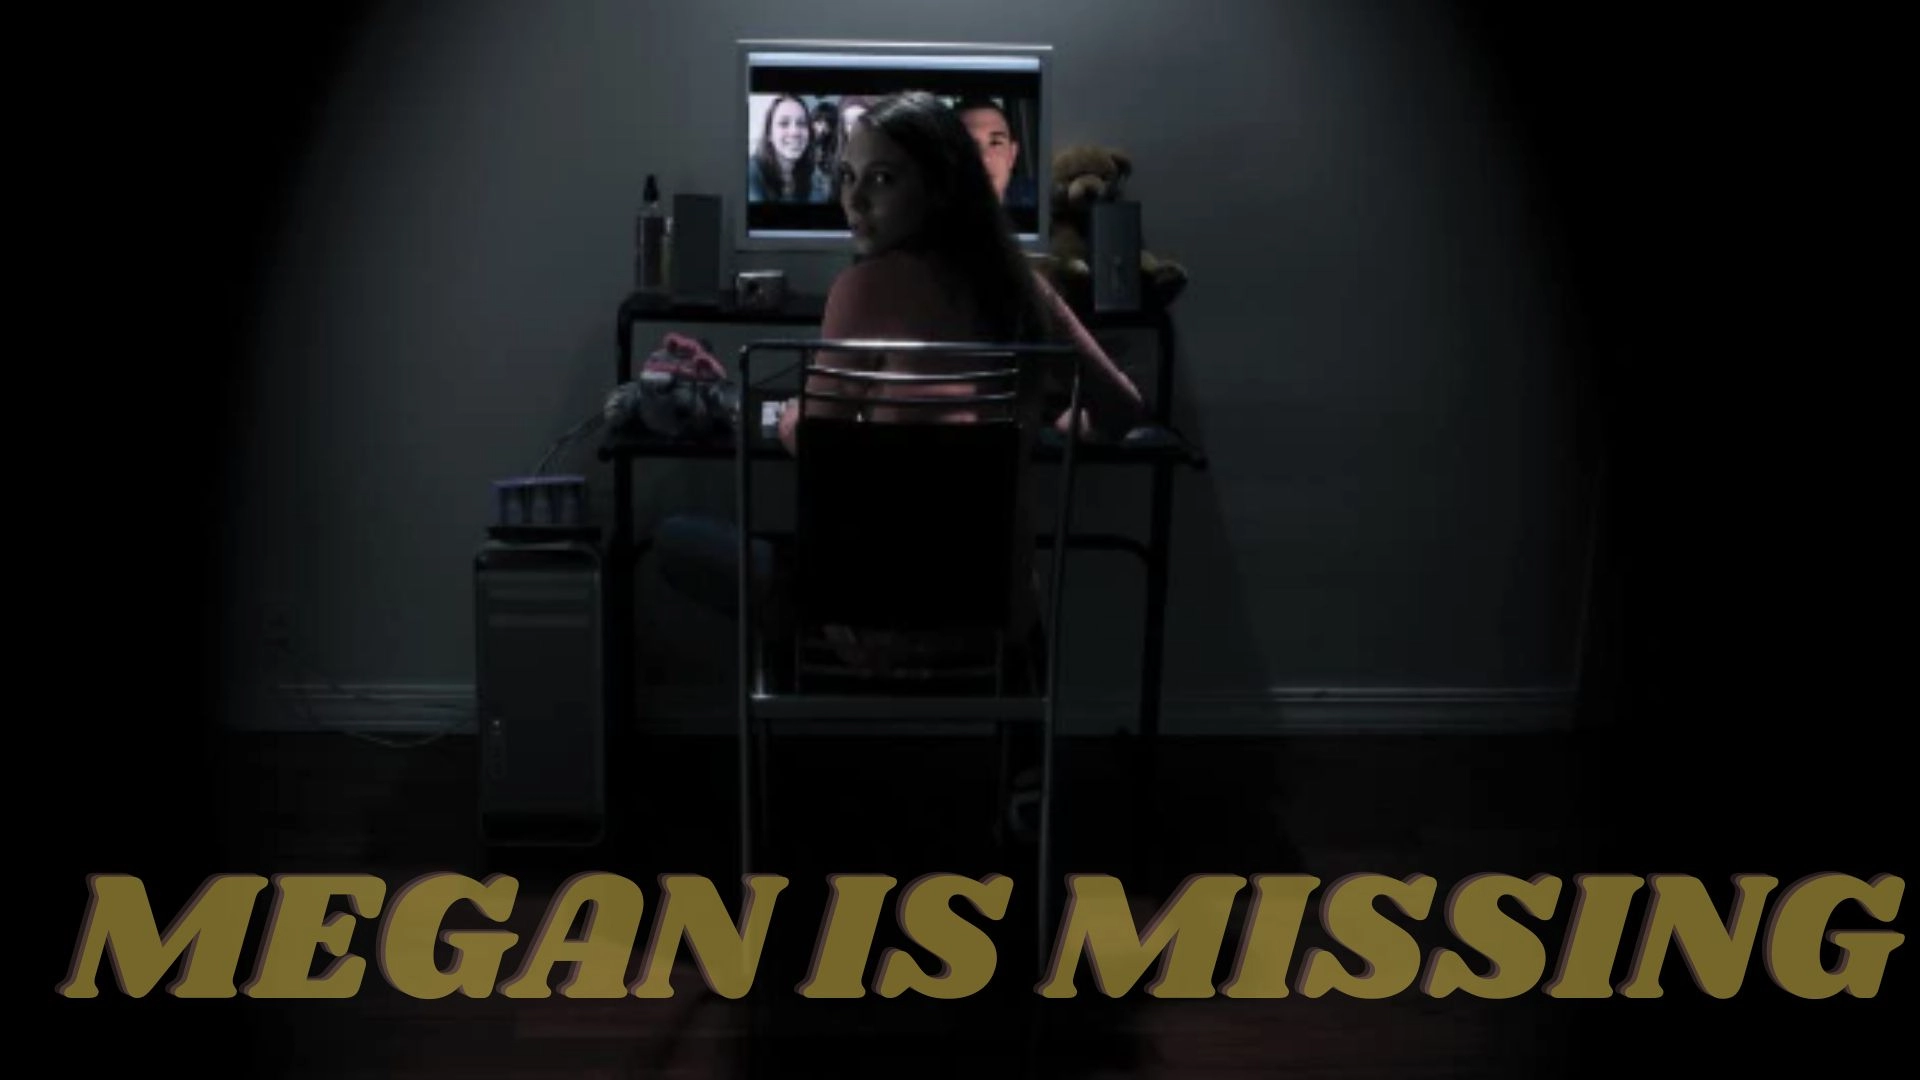 Megan Is Missing Parents Guide and Age Rating (2011)